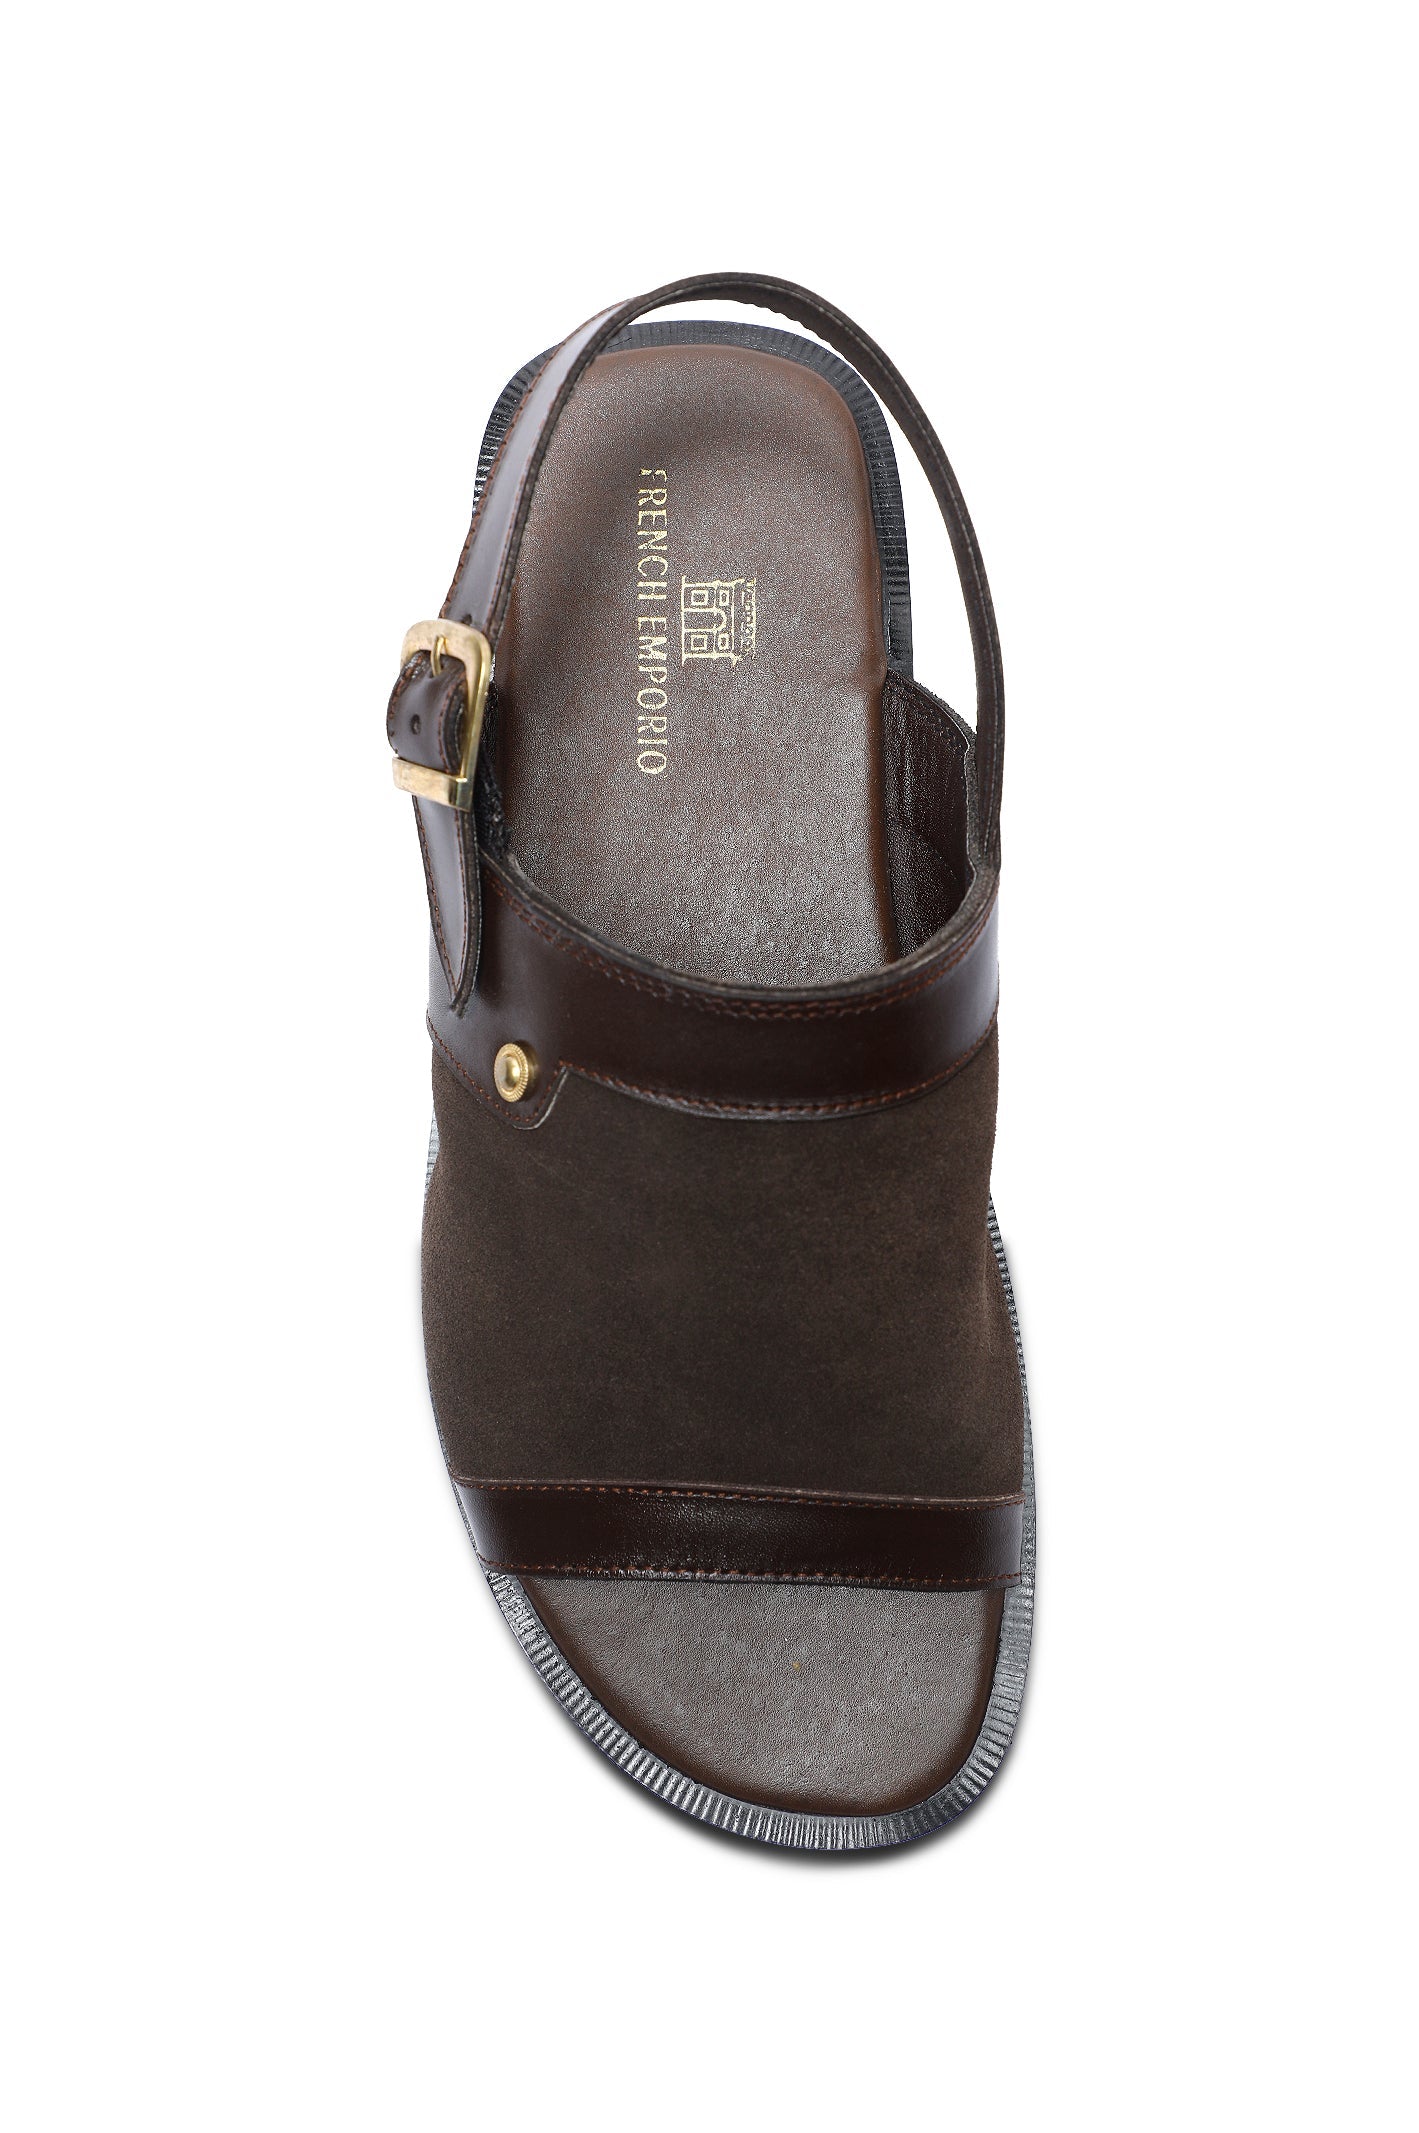 French Emporio Men's Sandal SKU: SLD-0041-COFFEE - Diners